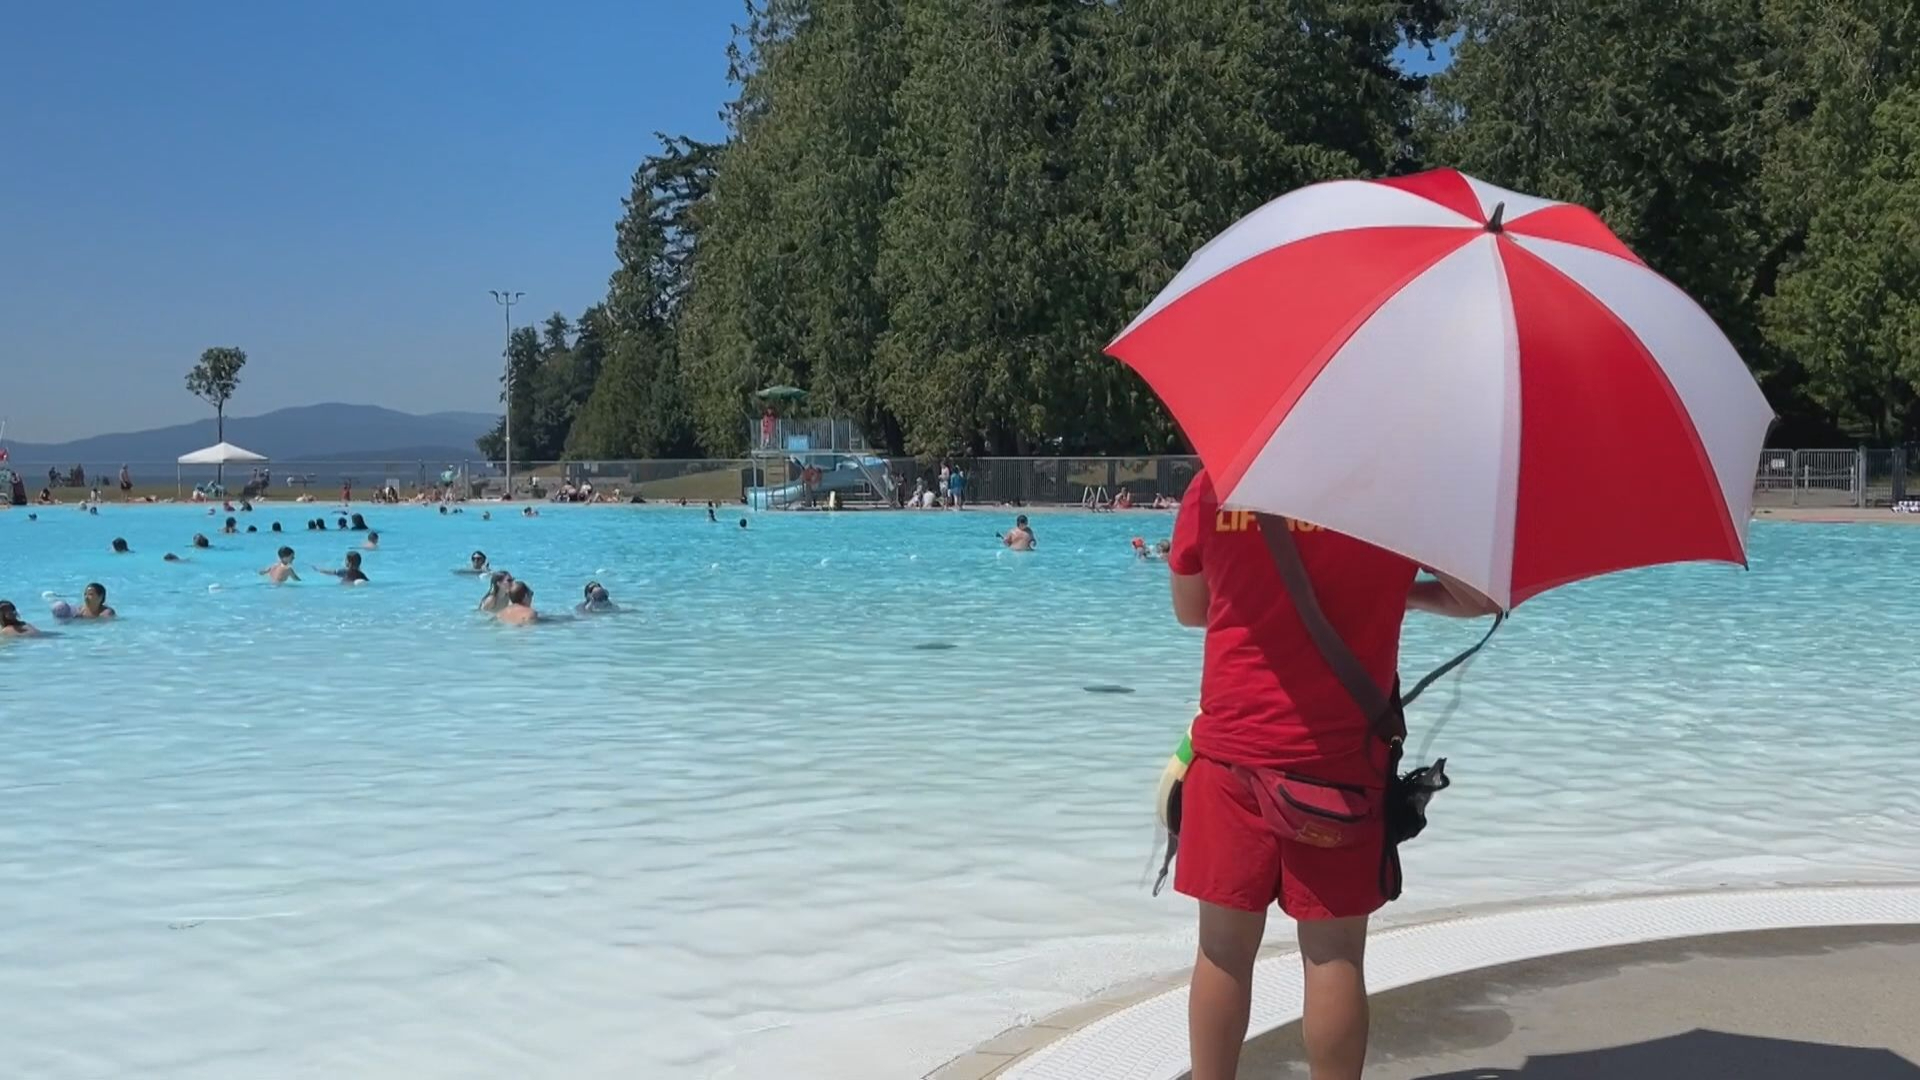 Second Beach Pool in hot demand this summer